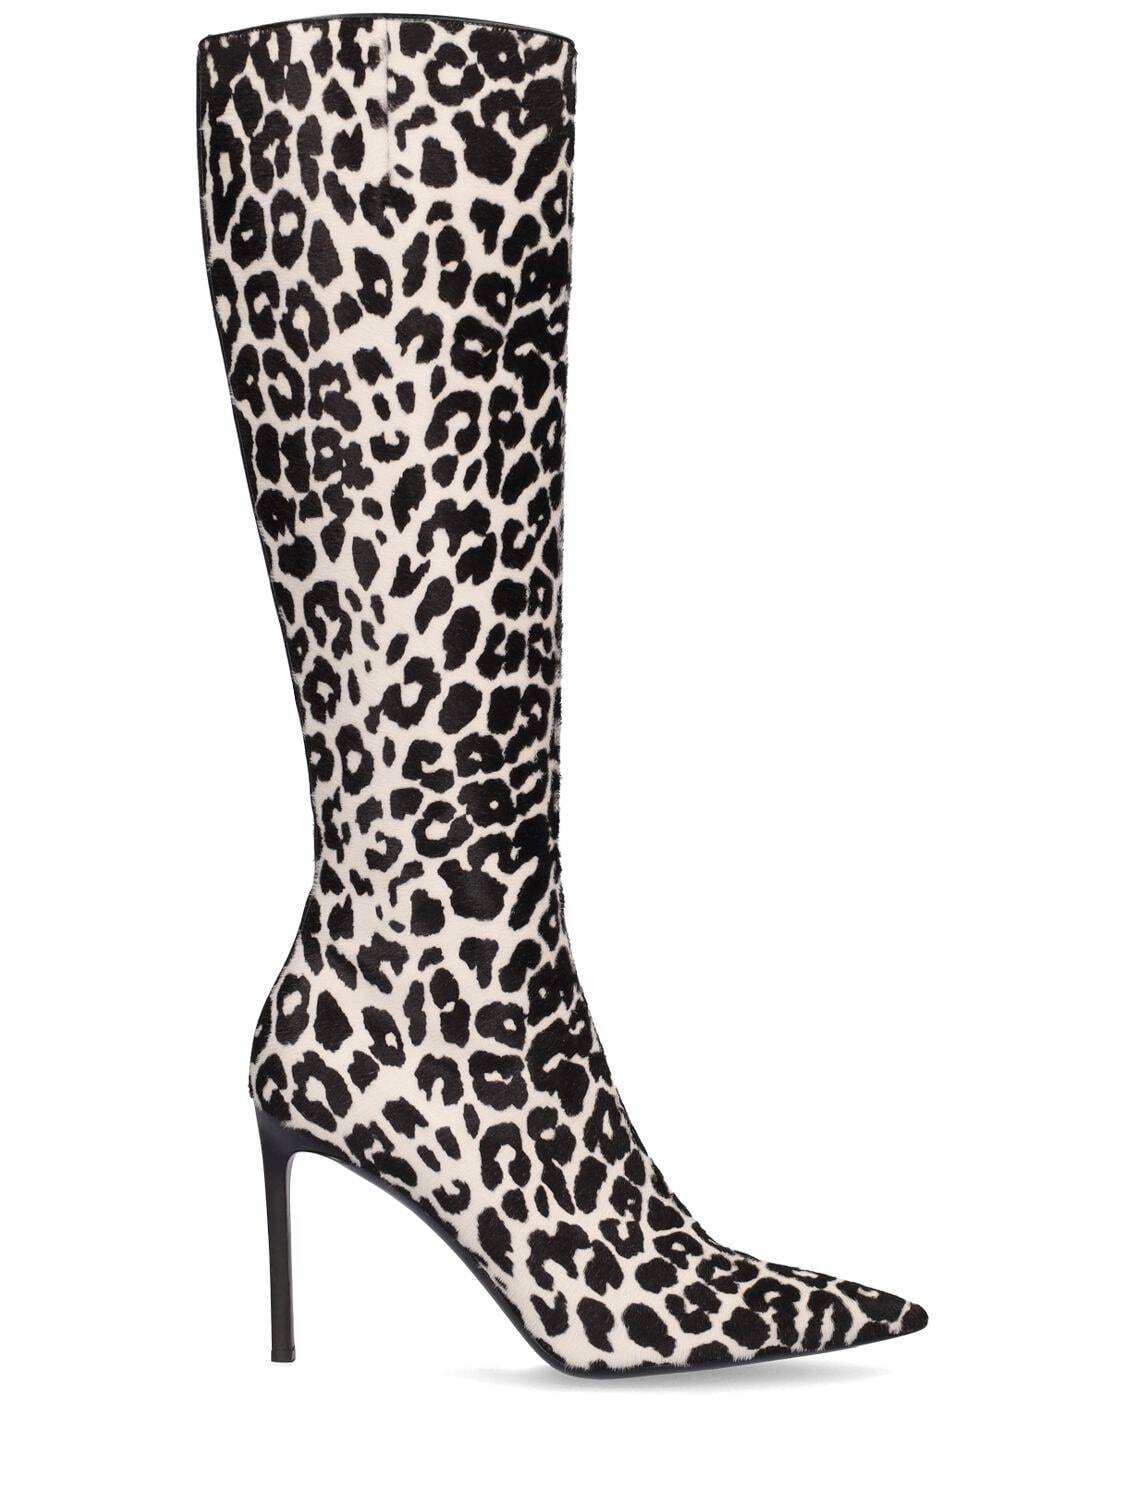 MICHAEL KORS COLLECTION 100mm Tatjana Printed Leather Boots in black / white